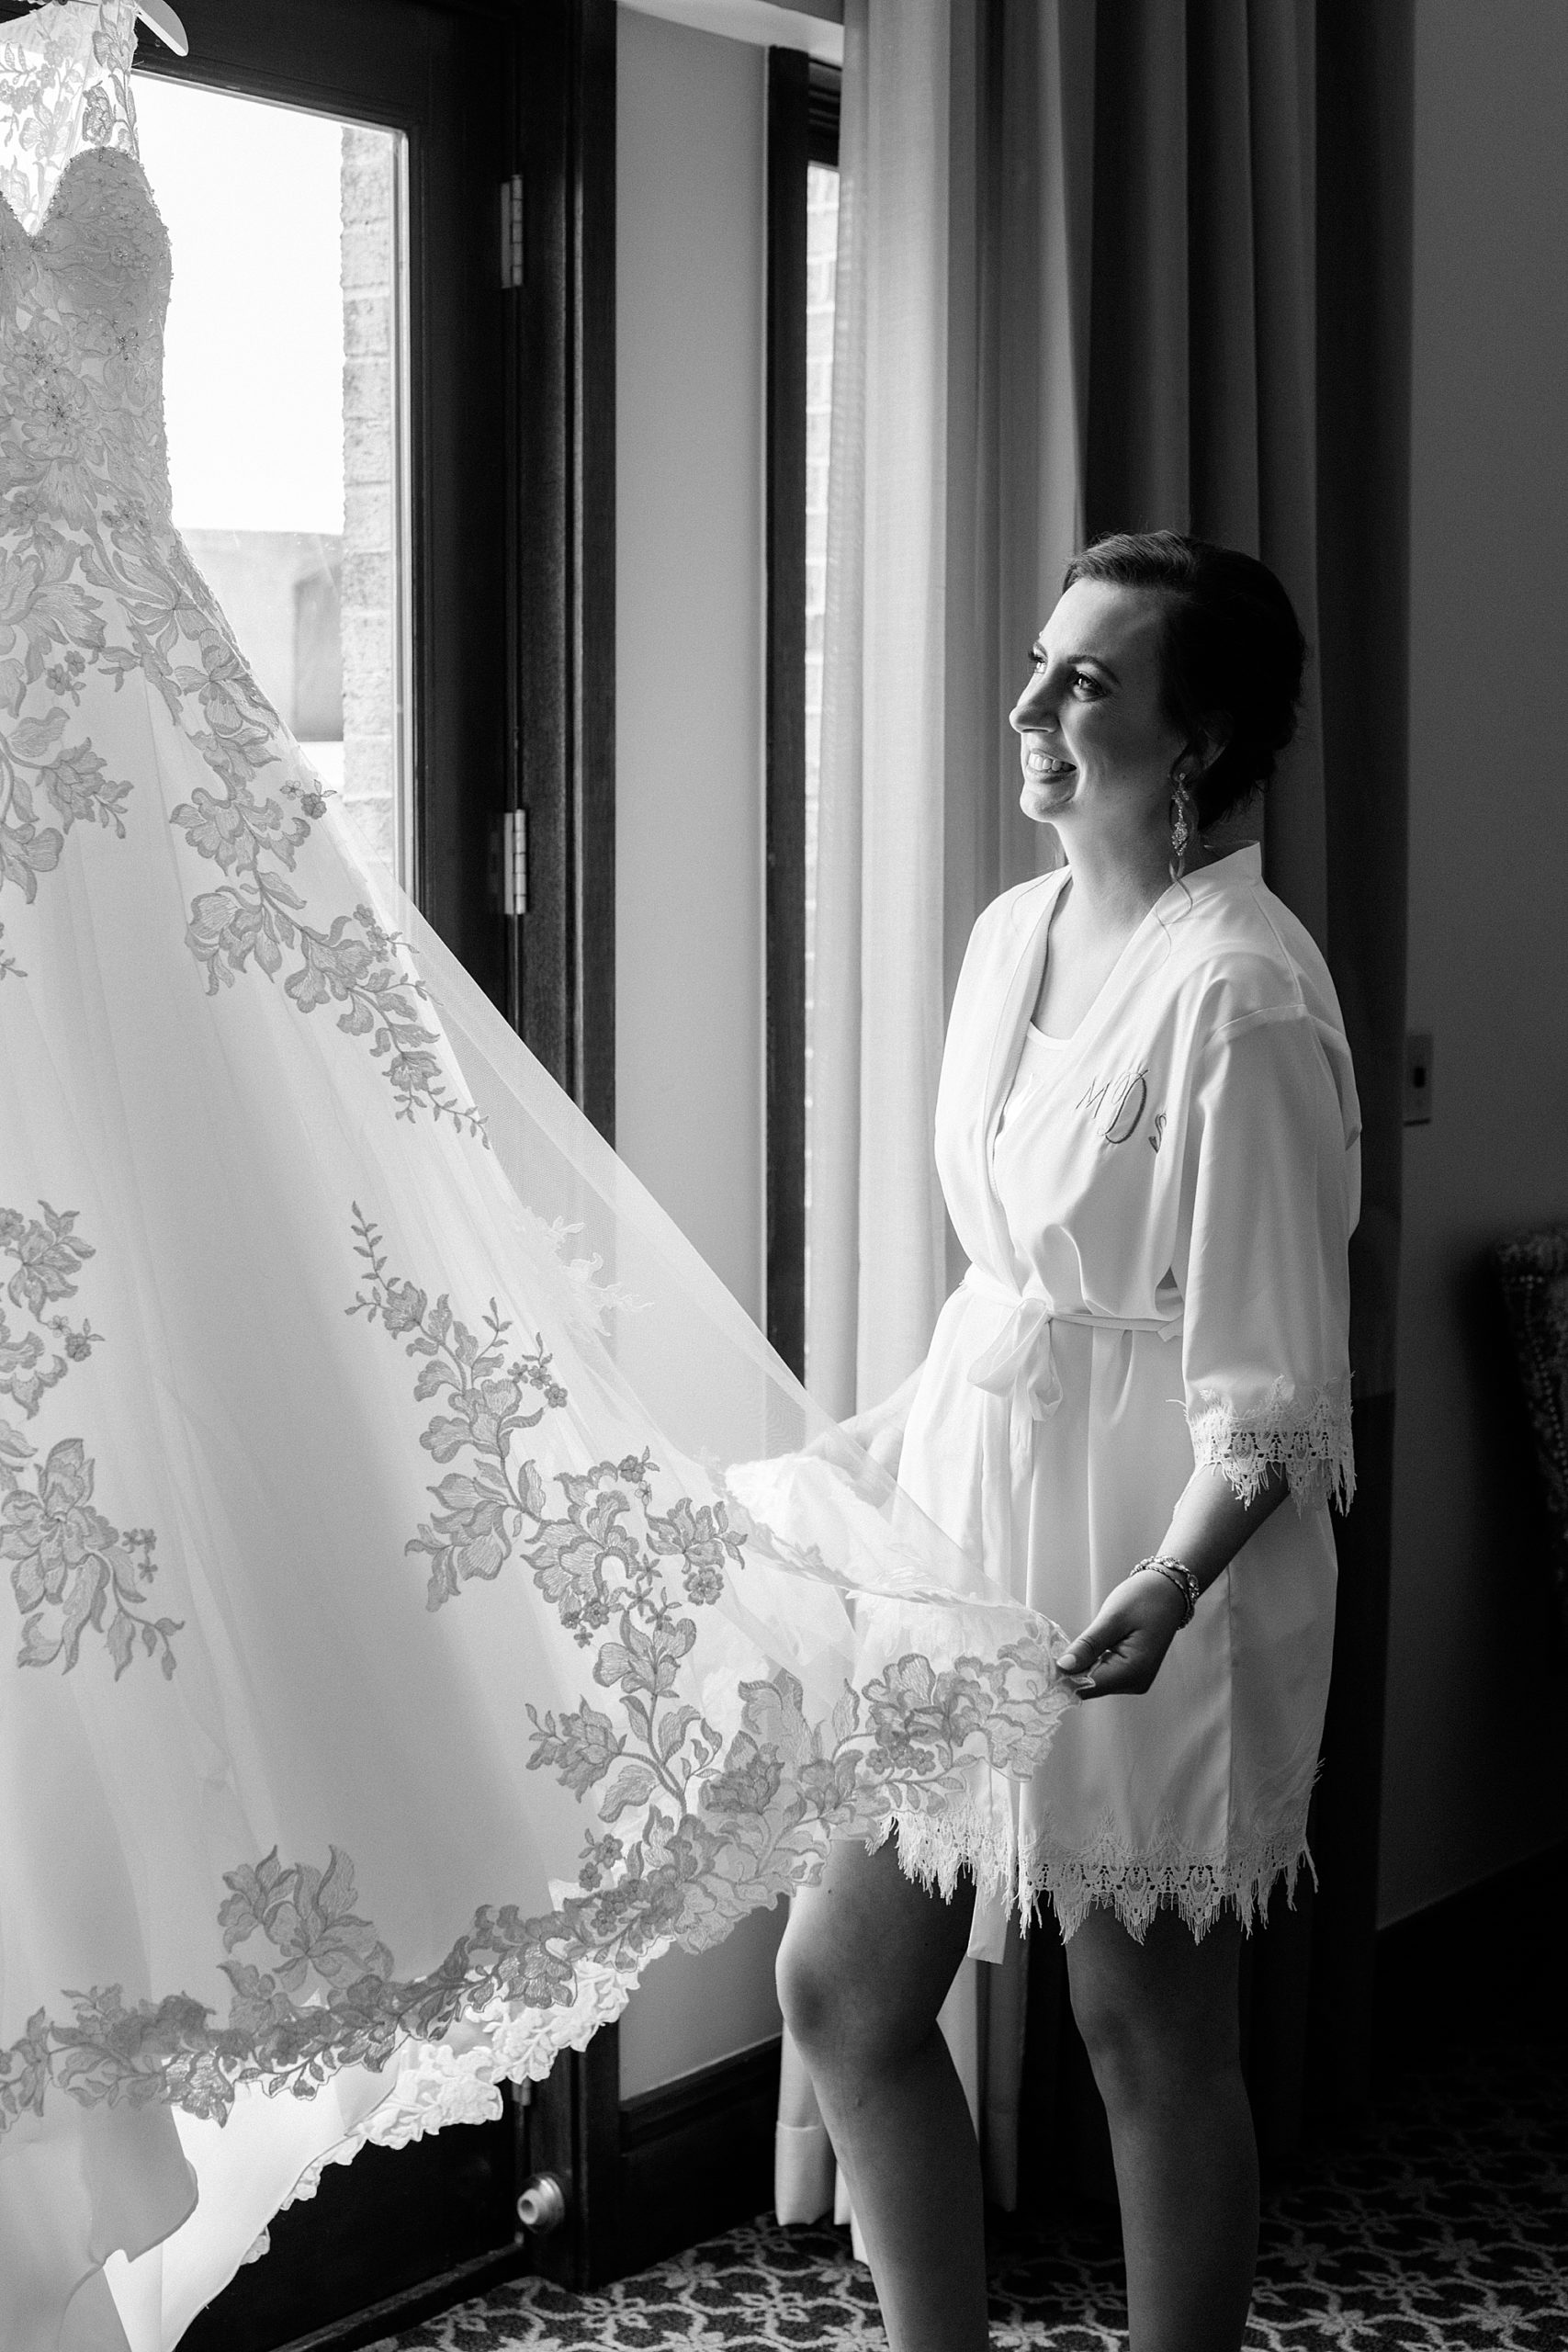 A romantic spring Michigan Inn at St. John’s wedding by Breanne Rochelle Photography.